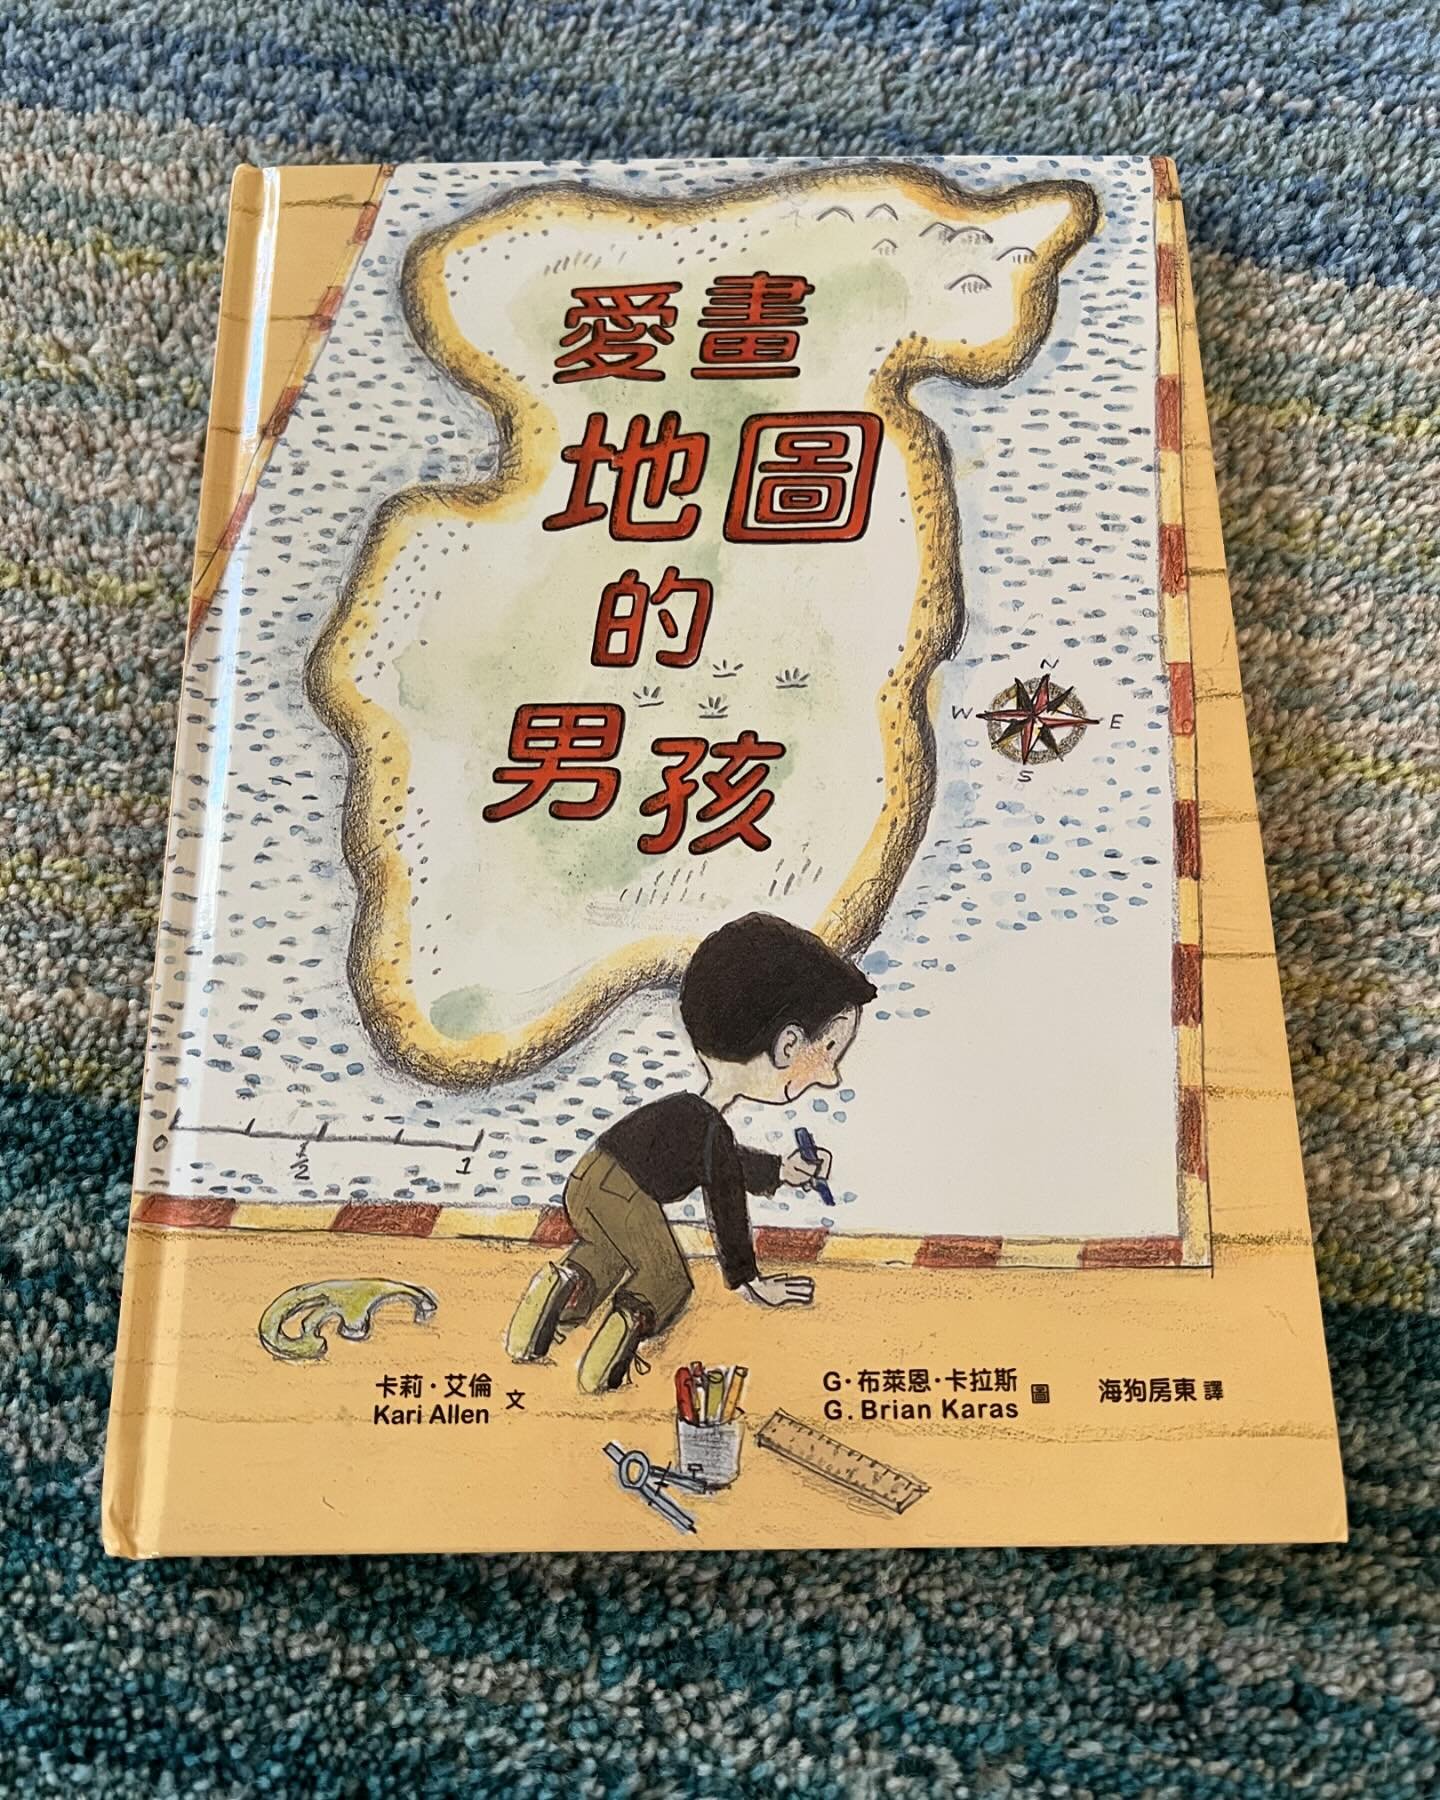 Eeeeeeeeeek! How amazingly cool is this? Check out the Chinese translation of The Boy Who Loved Maps. My first translated book! 

@henandinkliterary @anneschwartzbooks @gbriankaras 

#picturebooks #translation #kidlit #theboywholovedmaps